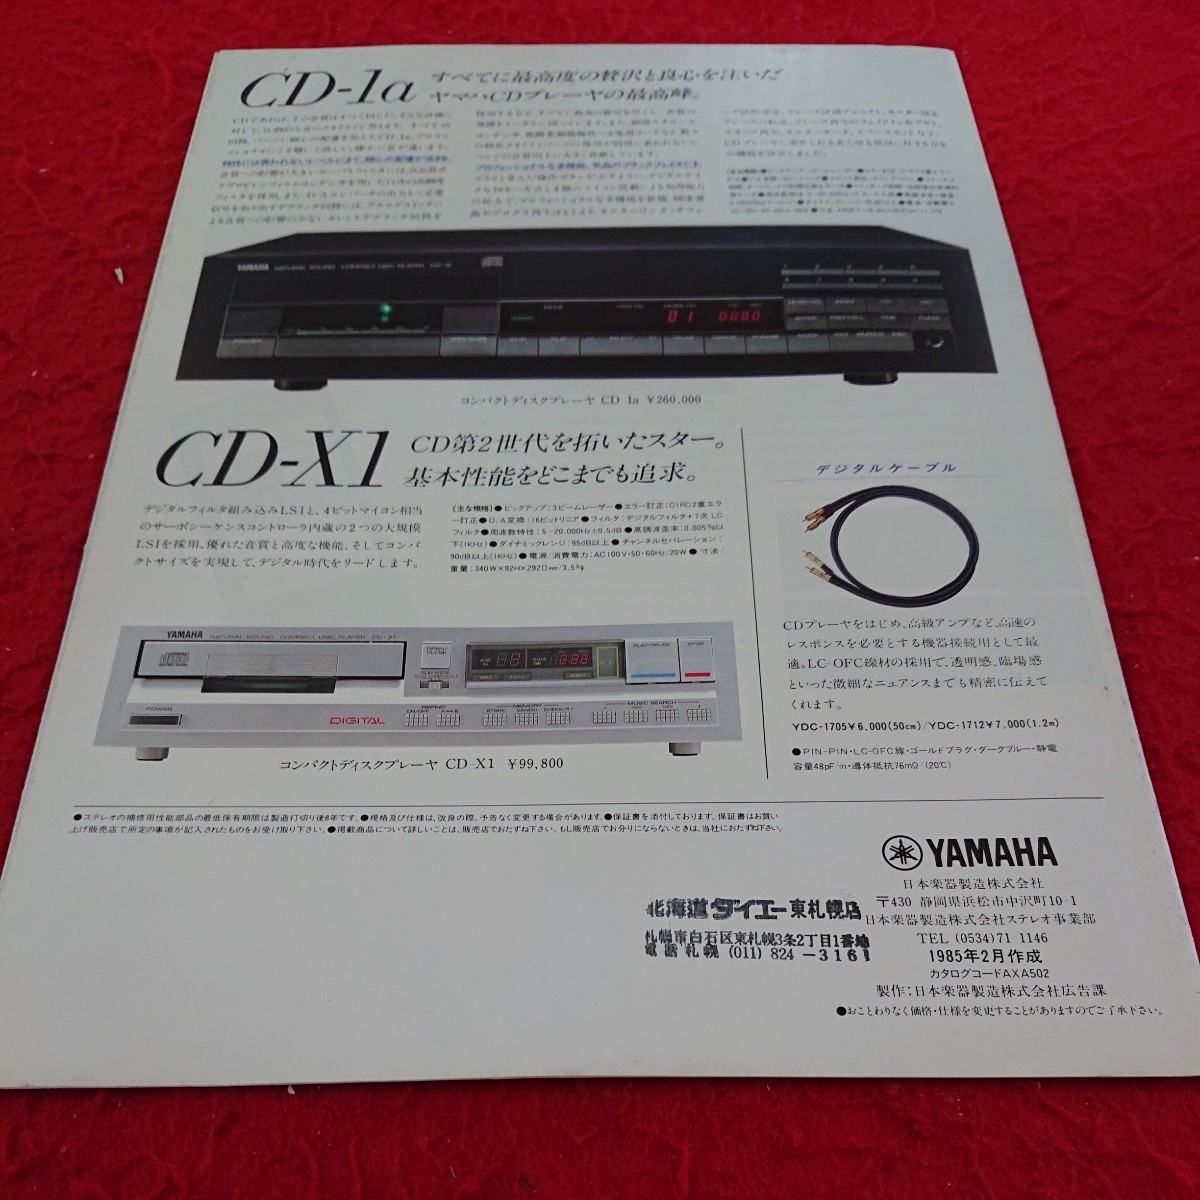 d-365 CD player general catalogue CD-1a CD-2 CD-3 CD-X1 CD-X2 Yamaha 1985 year issue compact disk digital audio *9